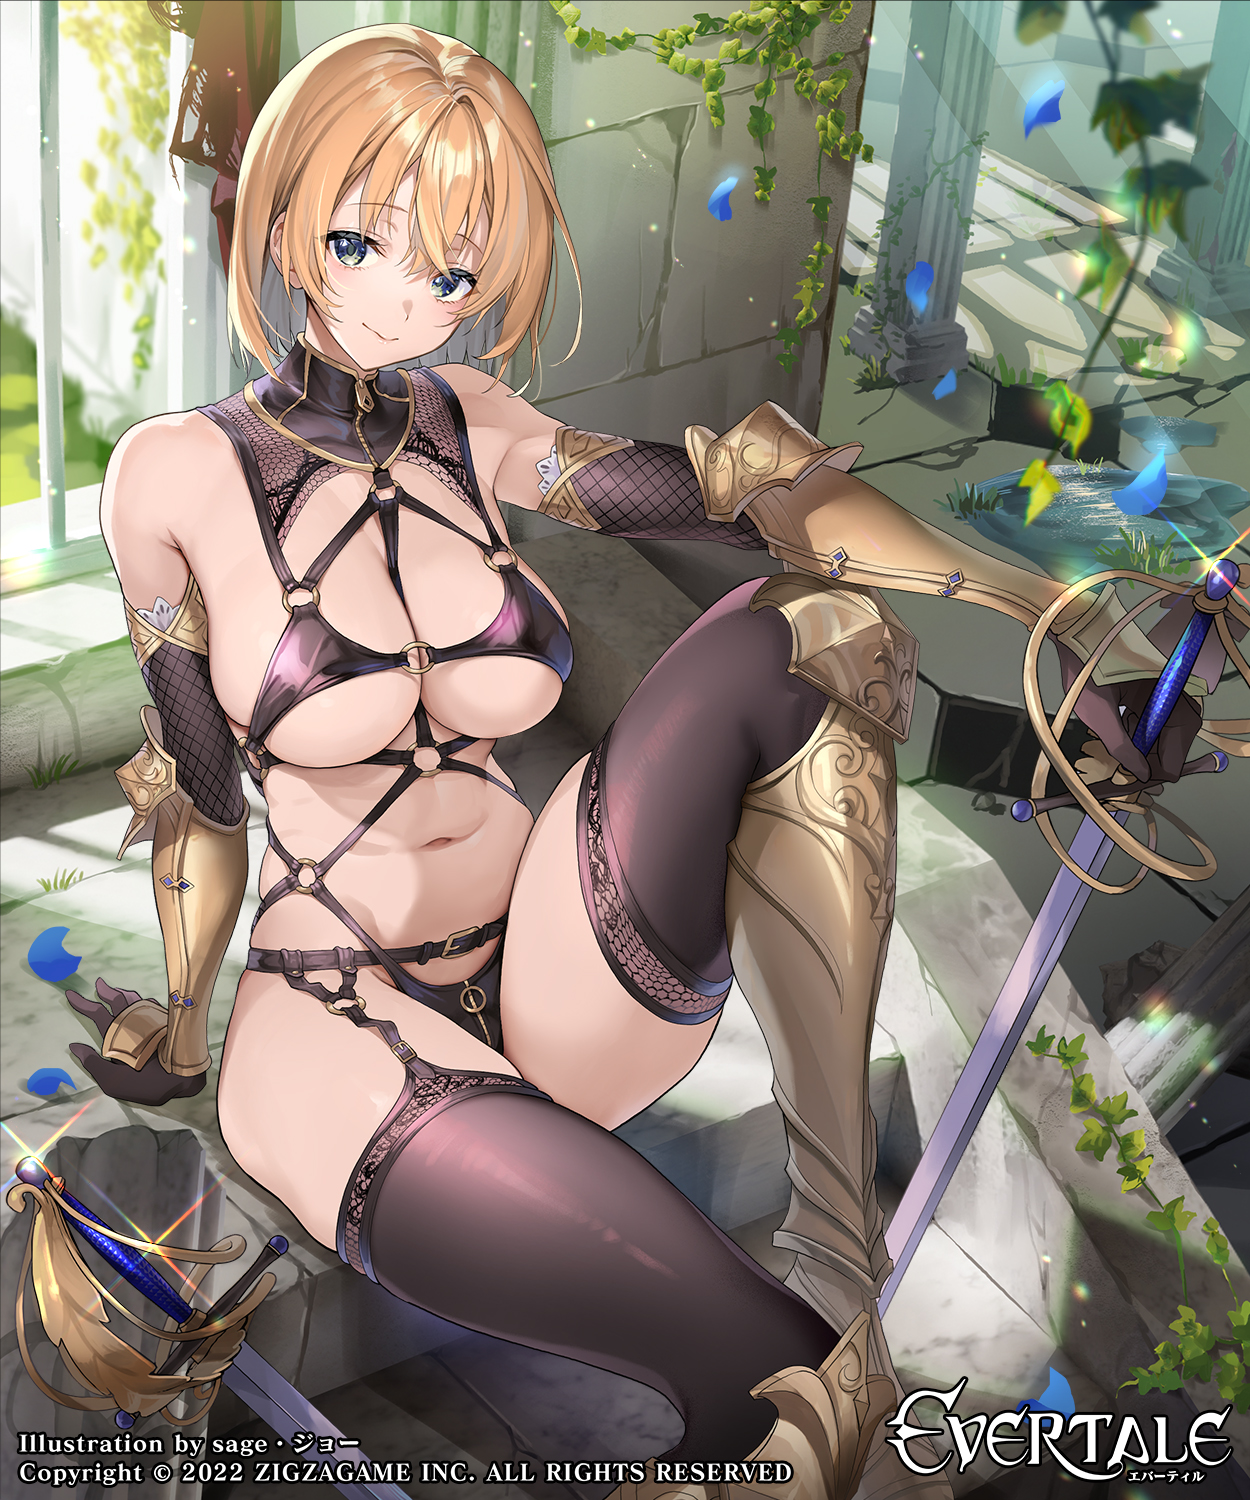 Anime 1250x1500 anime girls blonde blue eyes skimpy clothes petals sword big boobs stockings body harness armored woman